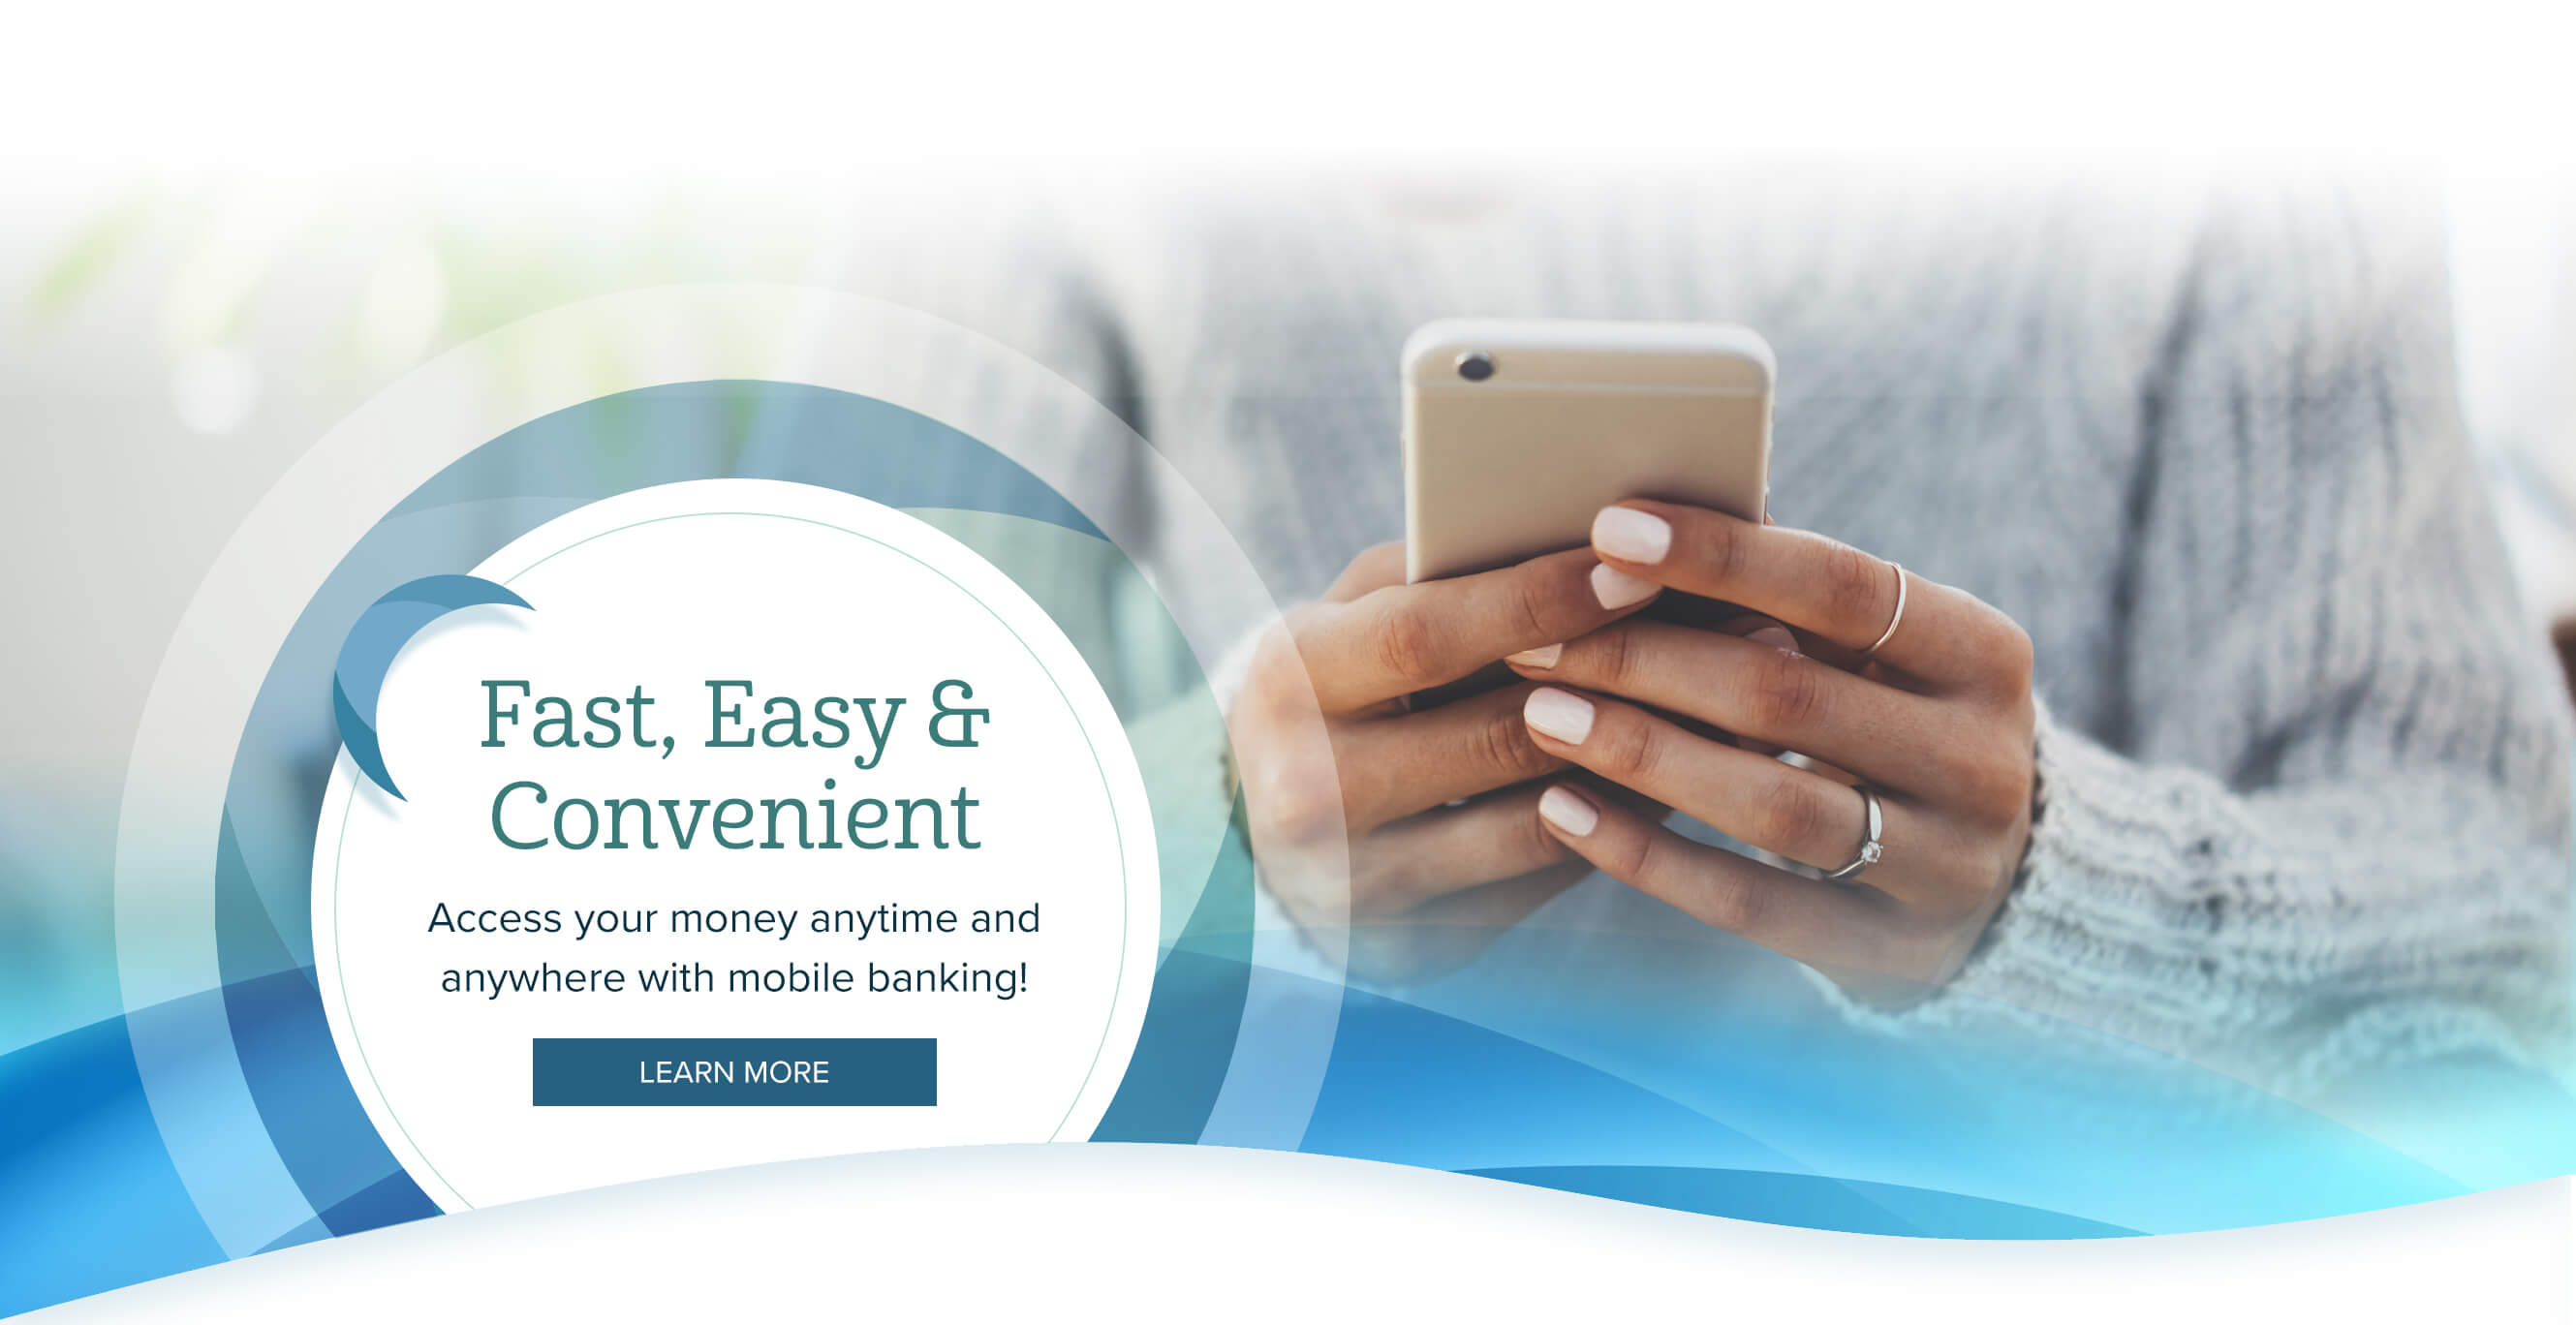 Fast, Easy & Convenient. Access your money anytime and anywhere with mobile banking! Learn More 